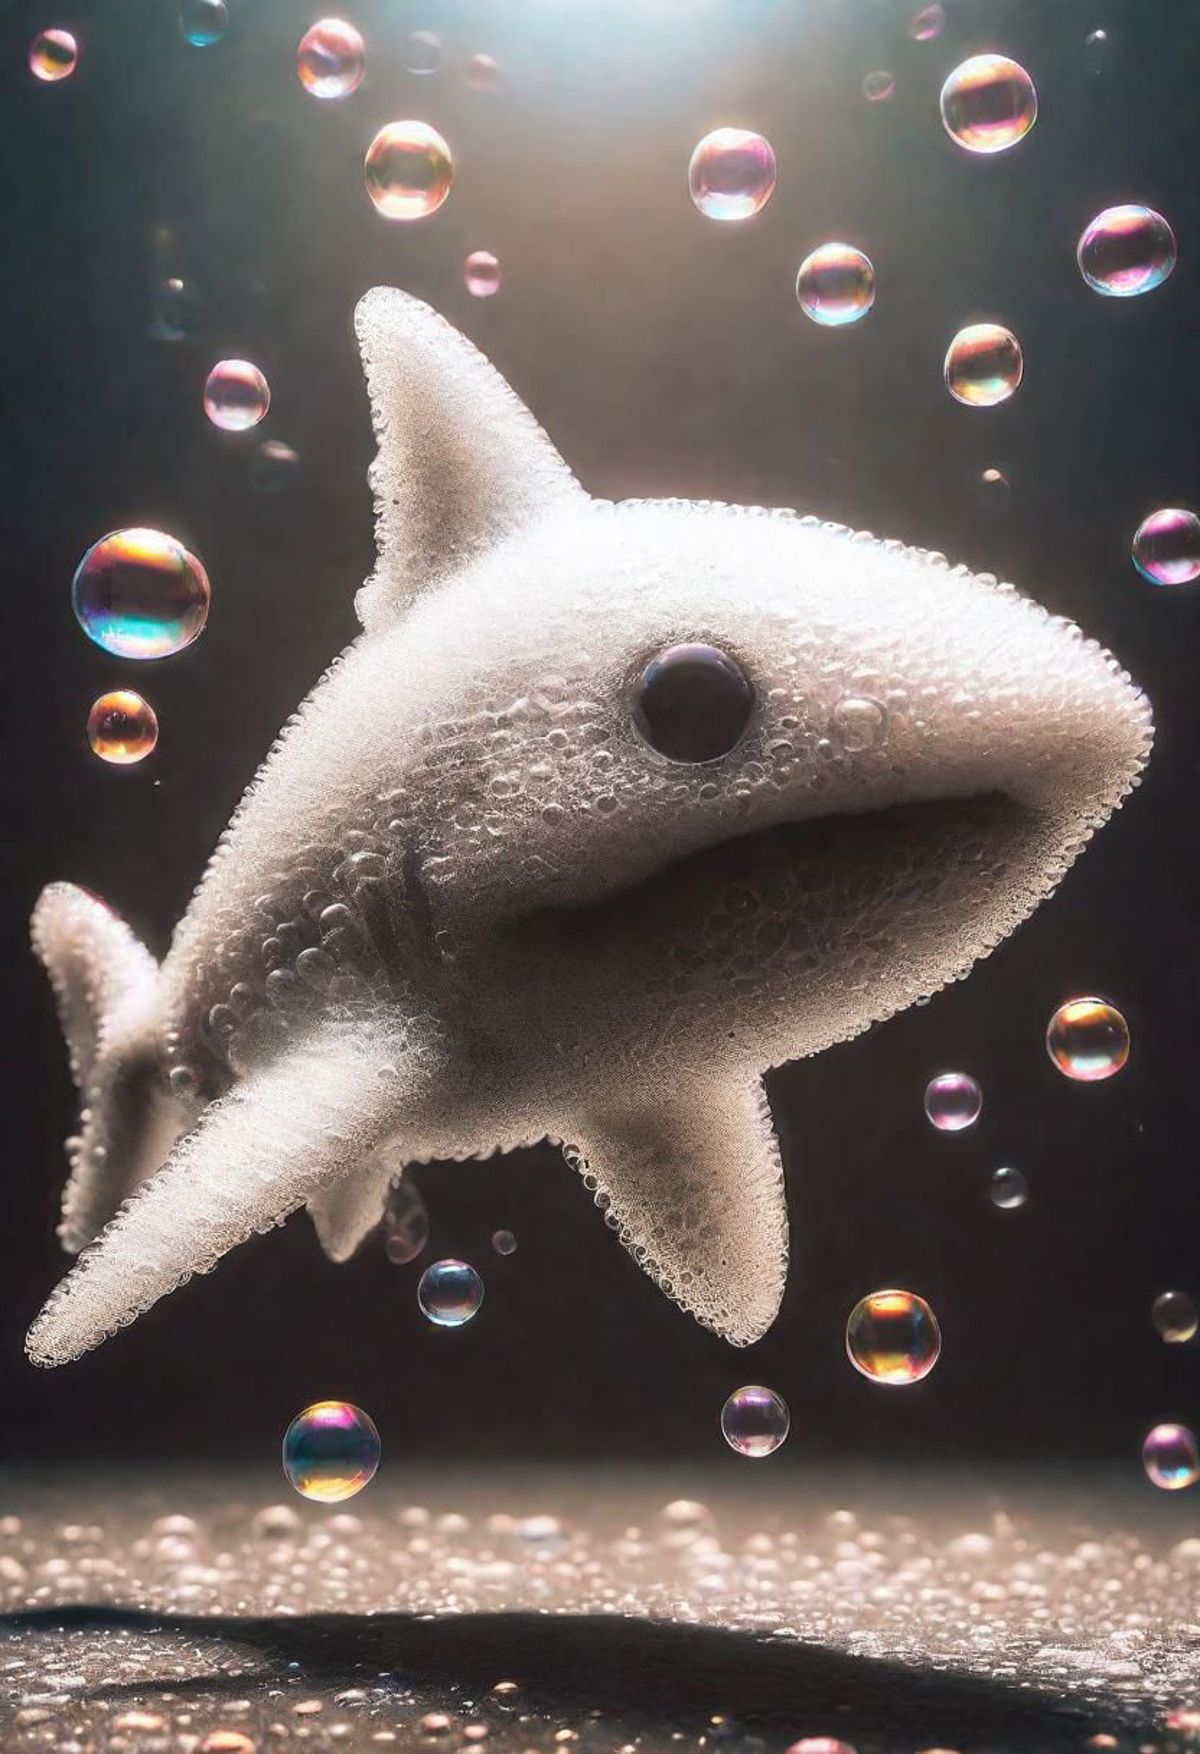 A 3D-rendered model of a white shark in a black background with bubbles.